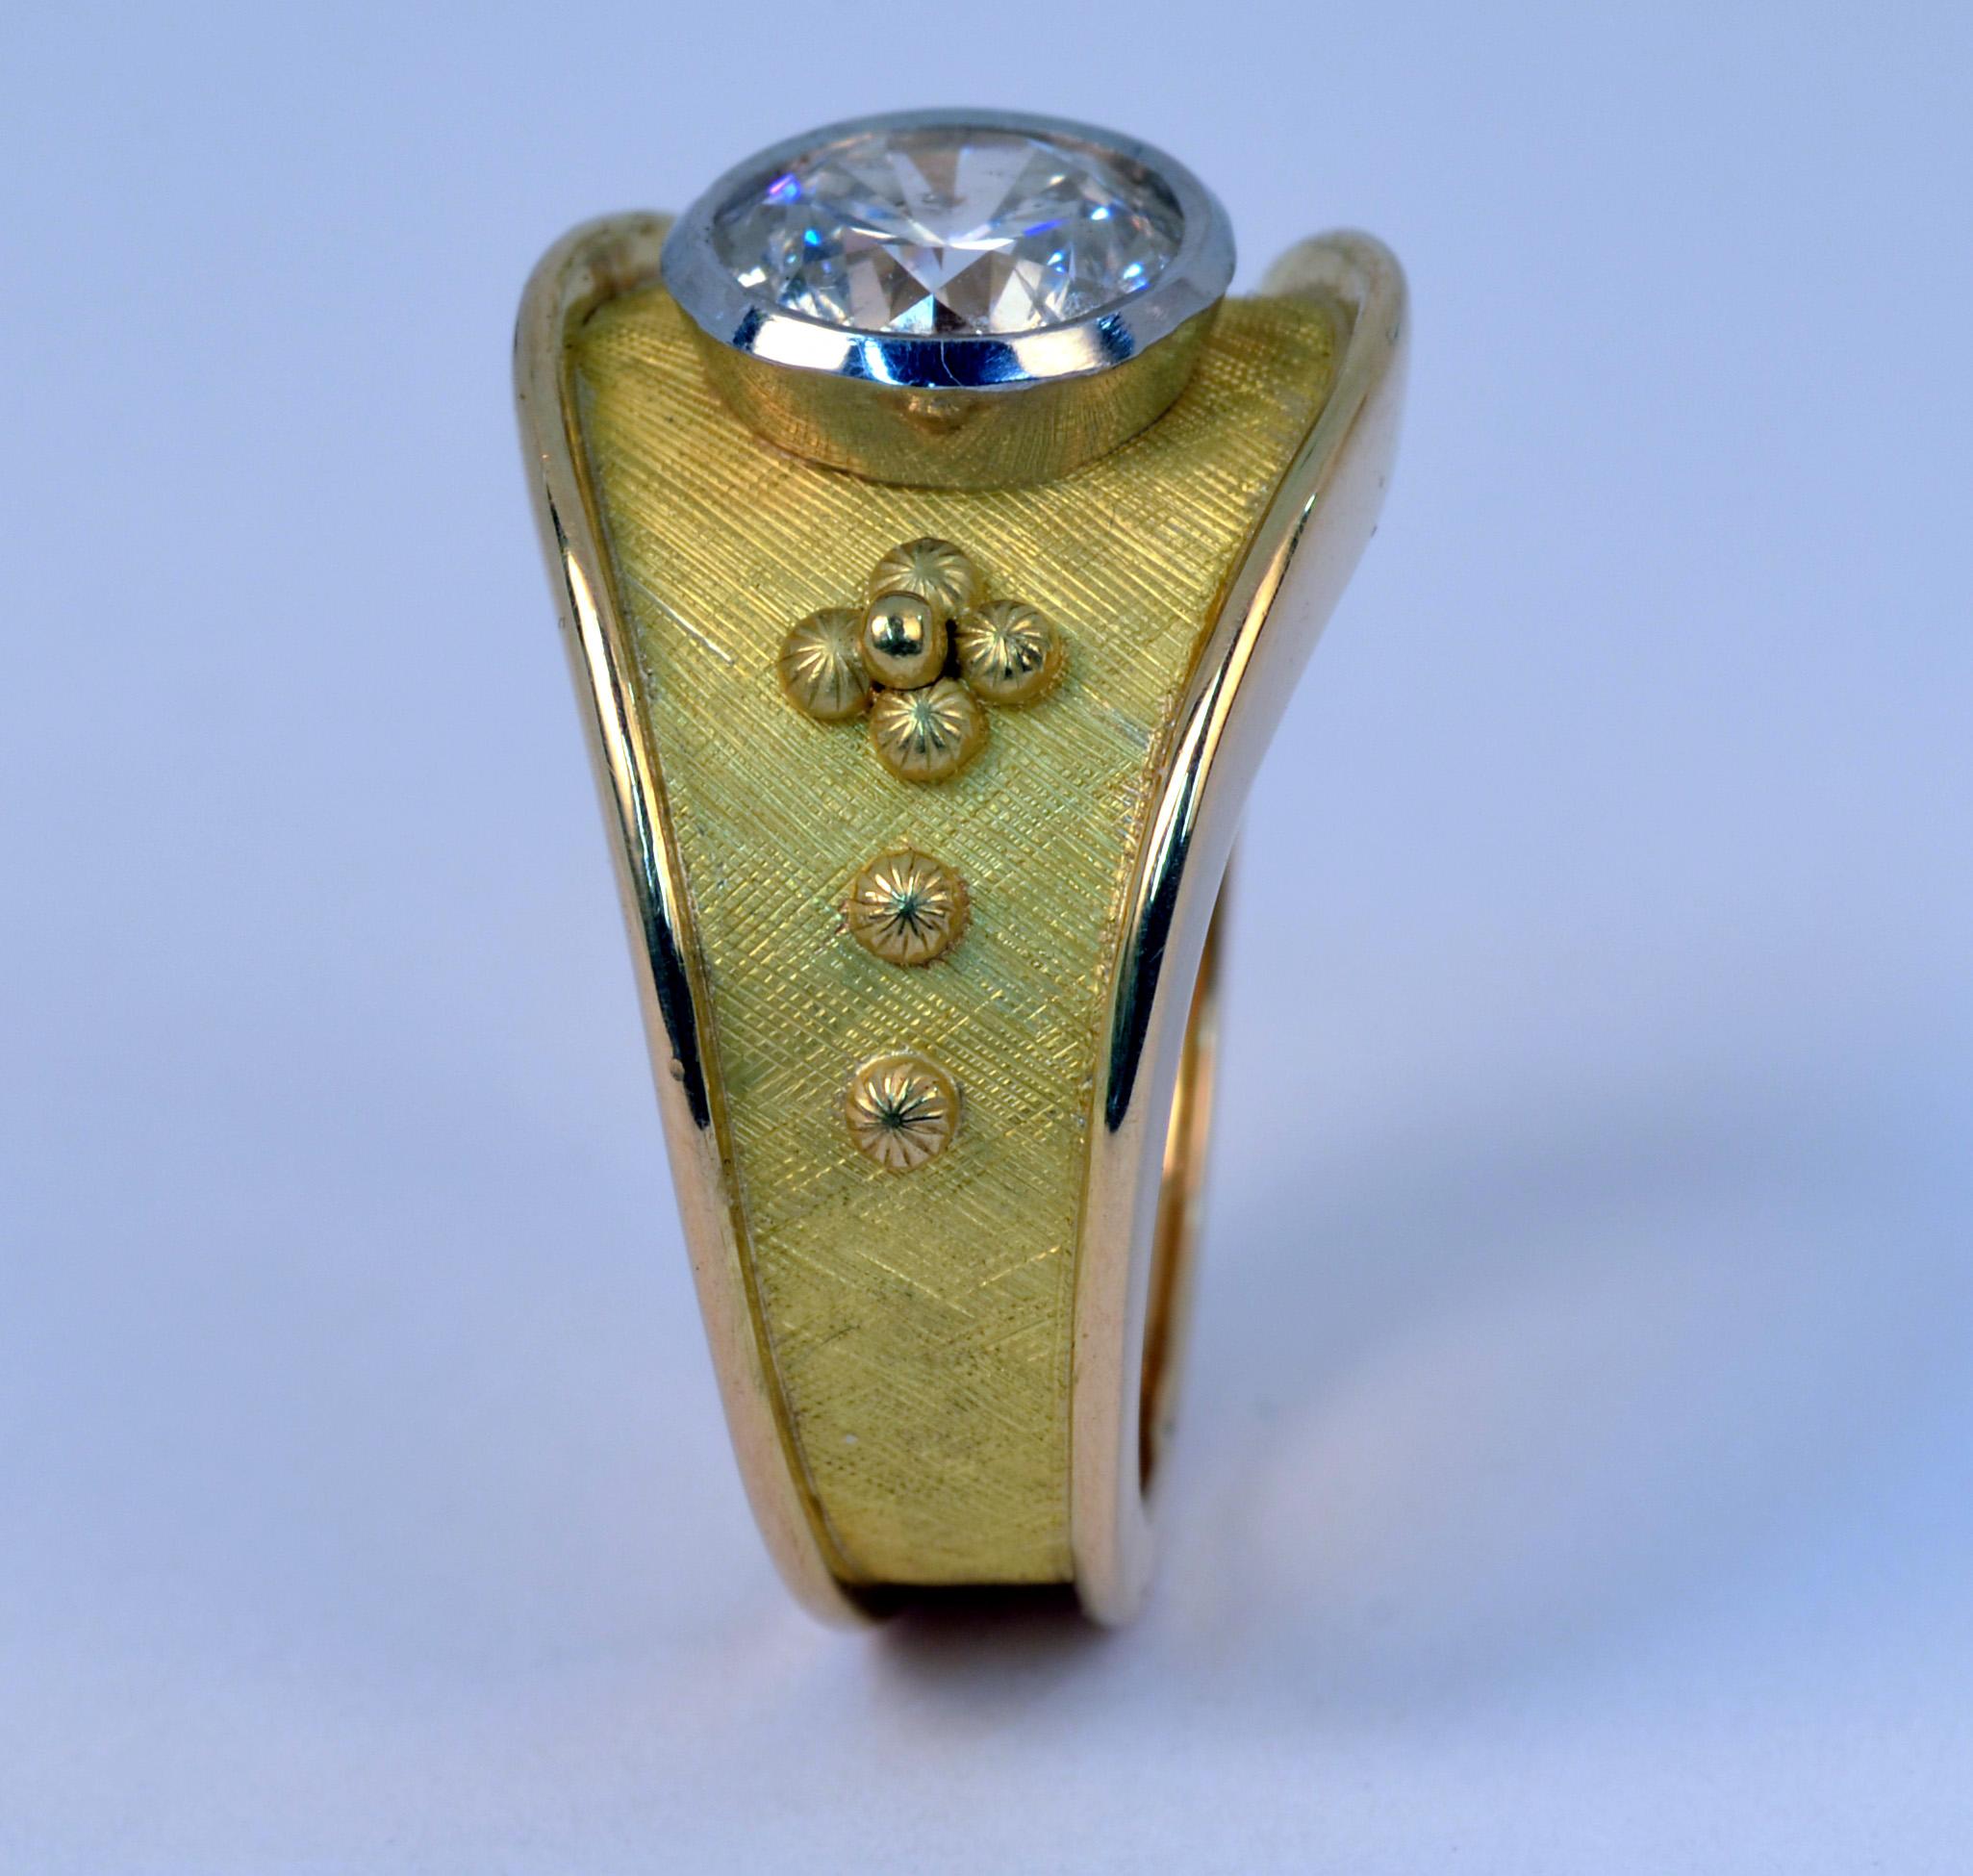 Handmade 18 Karat yellow gold and Platinum bezel set Diamond ring featuring a 1.56 round brilliant cut Diamond, G-H color and SI1 clarity. This piece is part of my Cigar Band series of rings, each one is  handcrafted and a one-of-kind creation. They